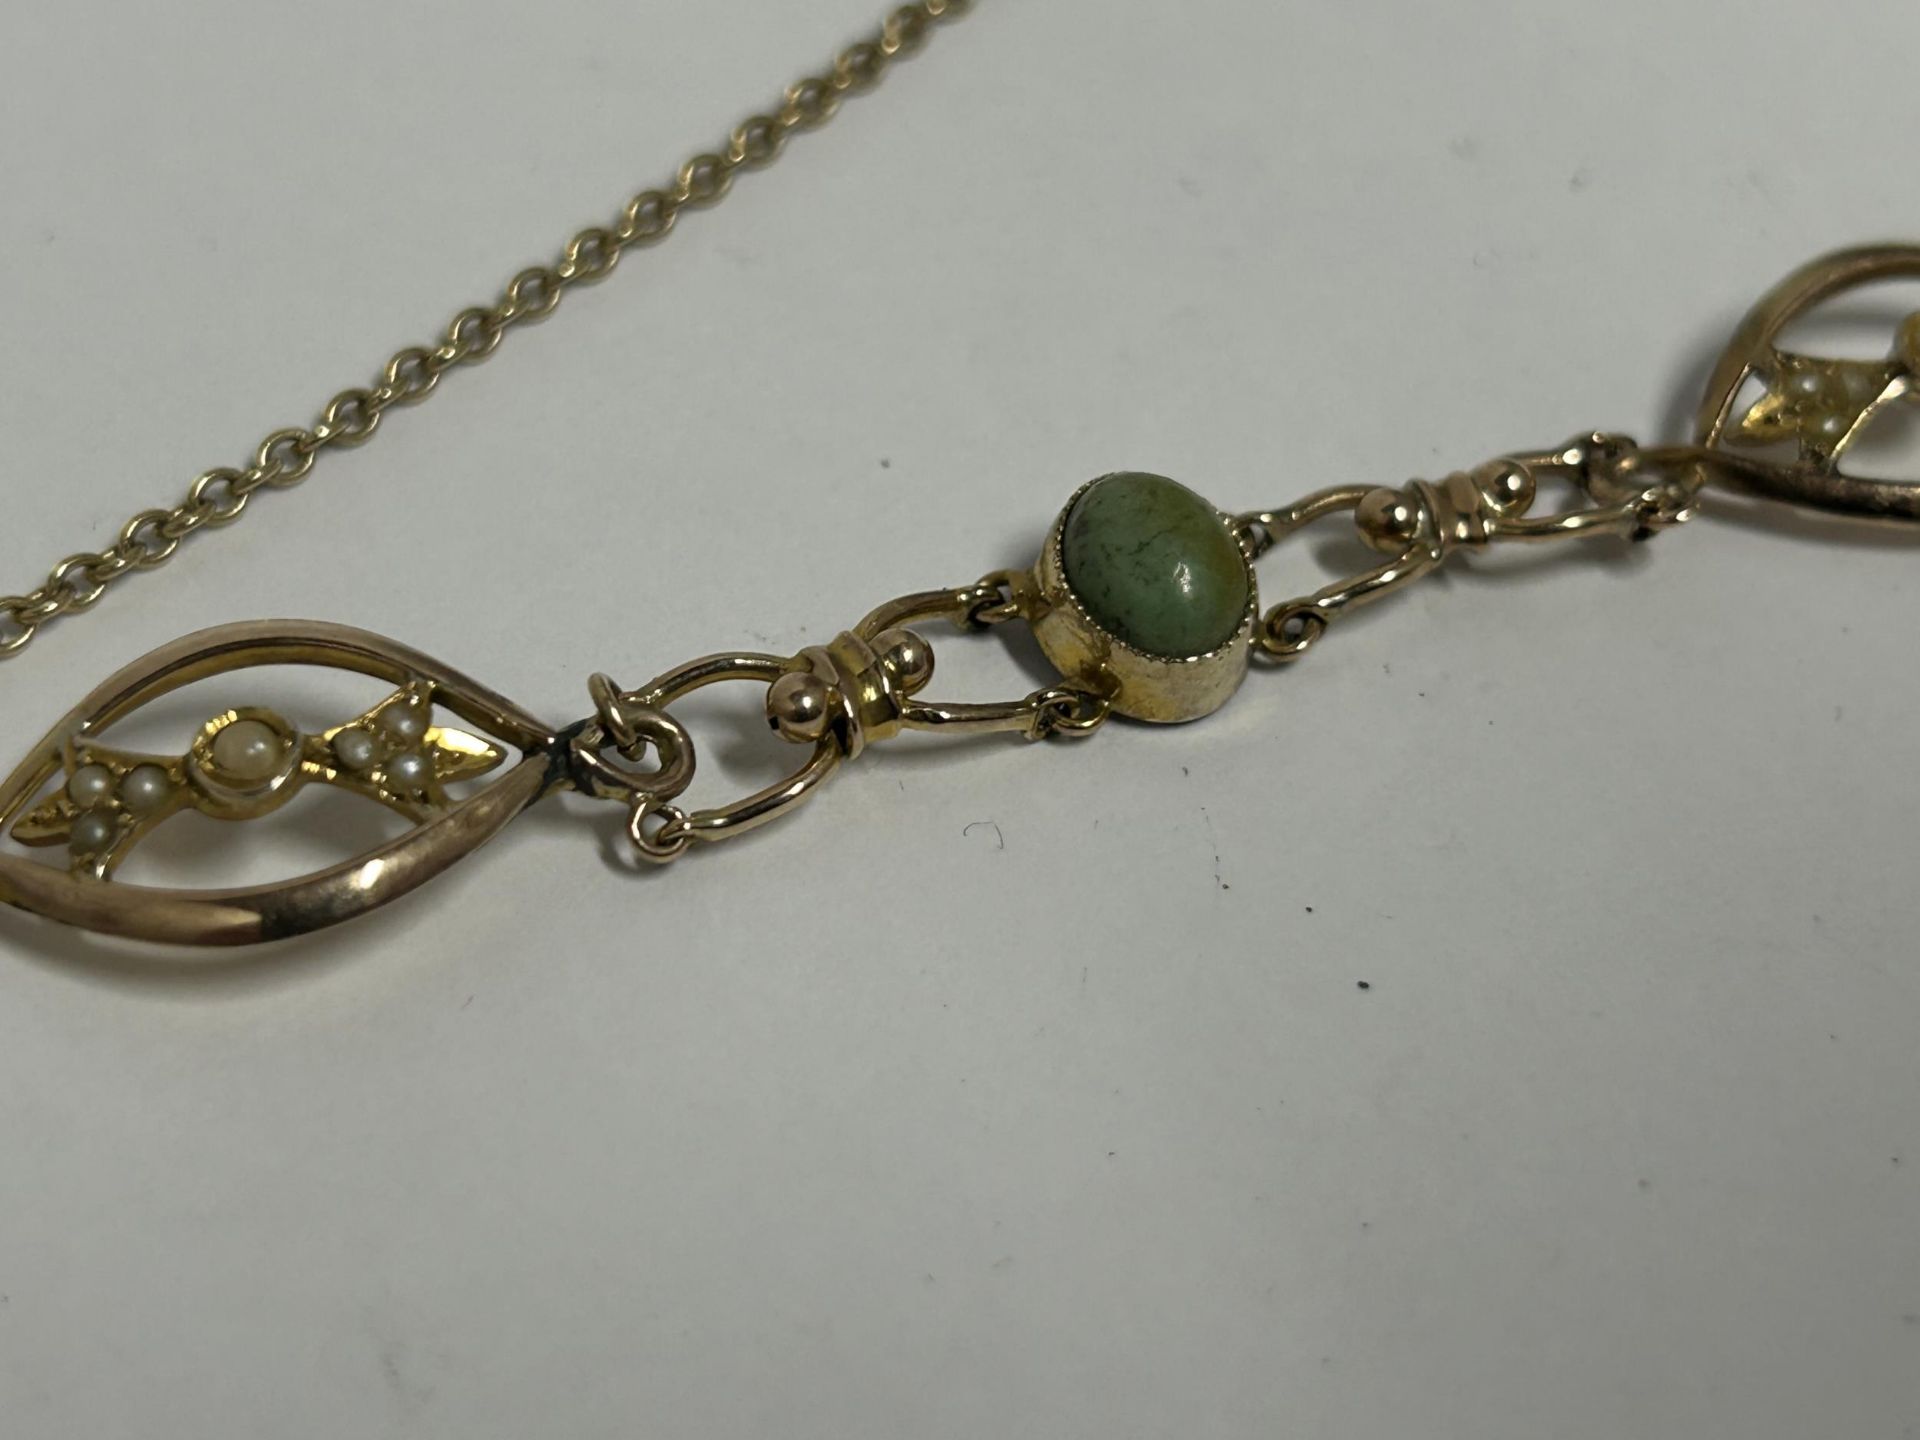 A VINTAGE 9CT YELLOW GOLD, JADE AND PEARL BRACELET GROSS WEIGHT 6.35 GRAMS, LENGTH 17CM - Image 4 of 6